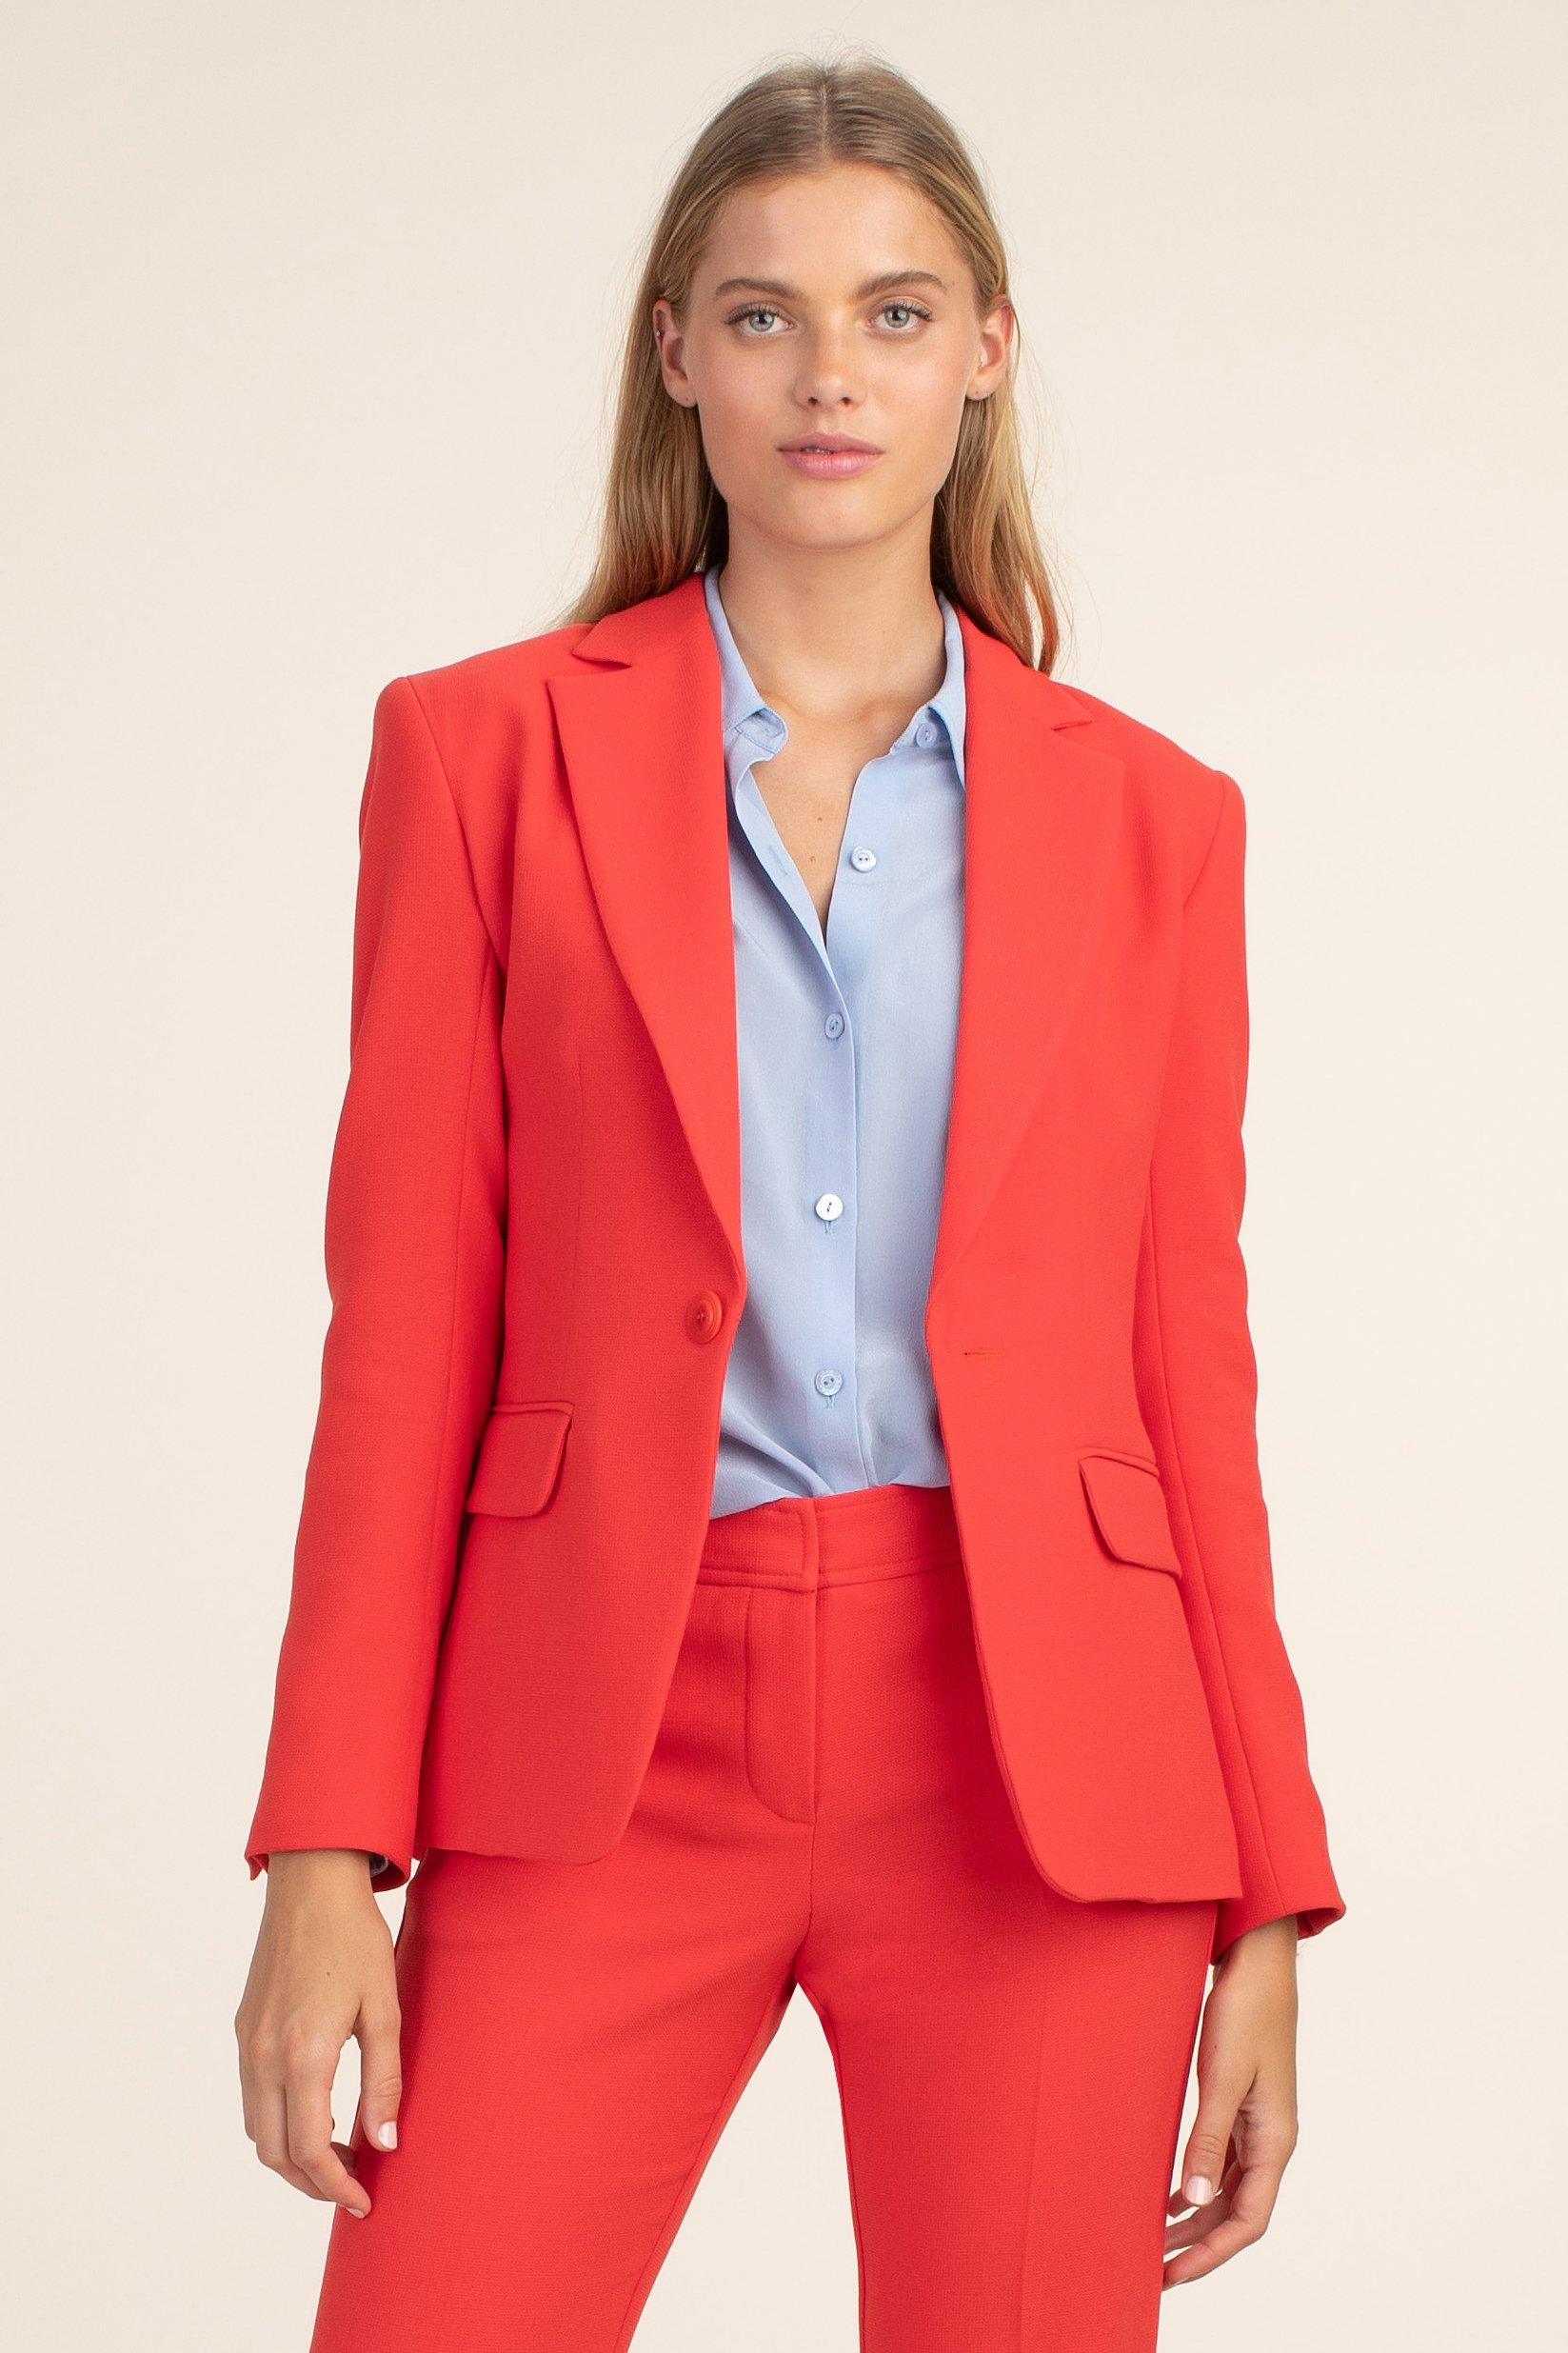 Trina Turk Synthetic Pistache Jacket in Red Hot Red (Red) - Lyst